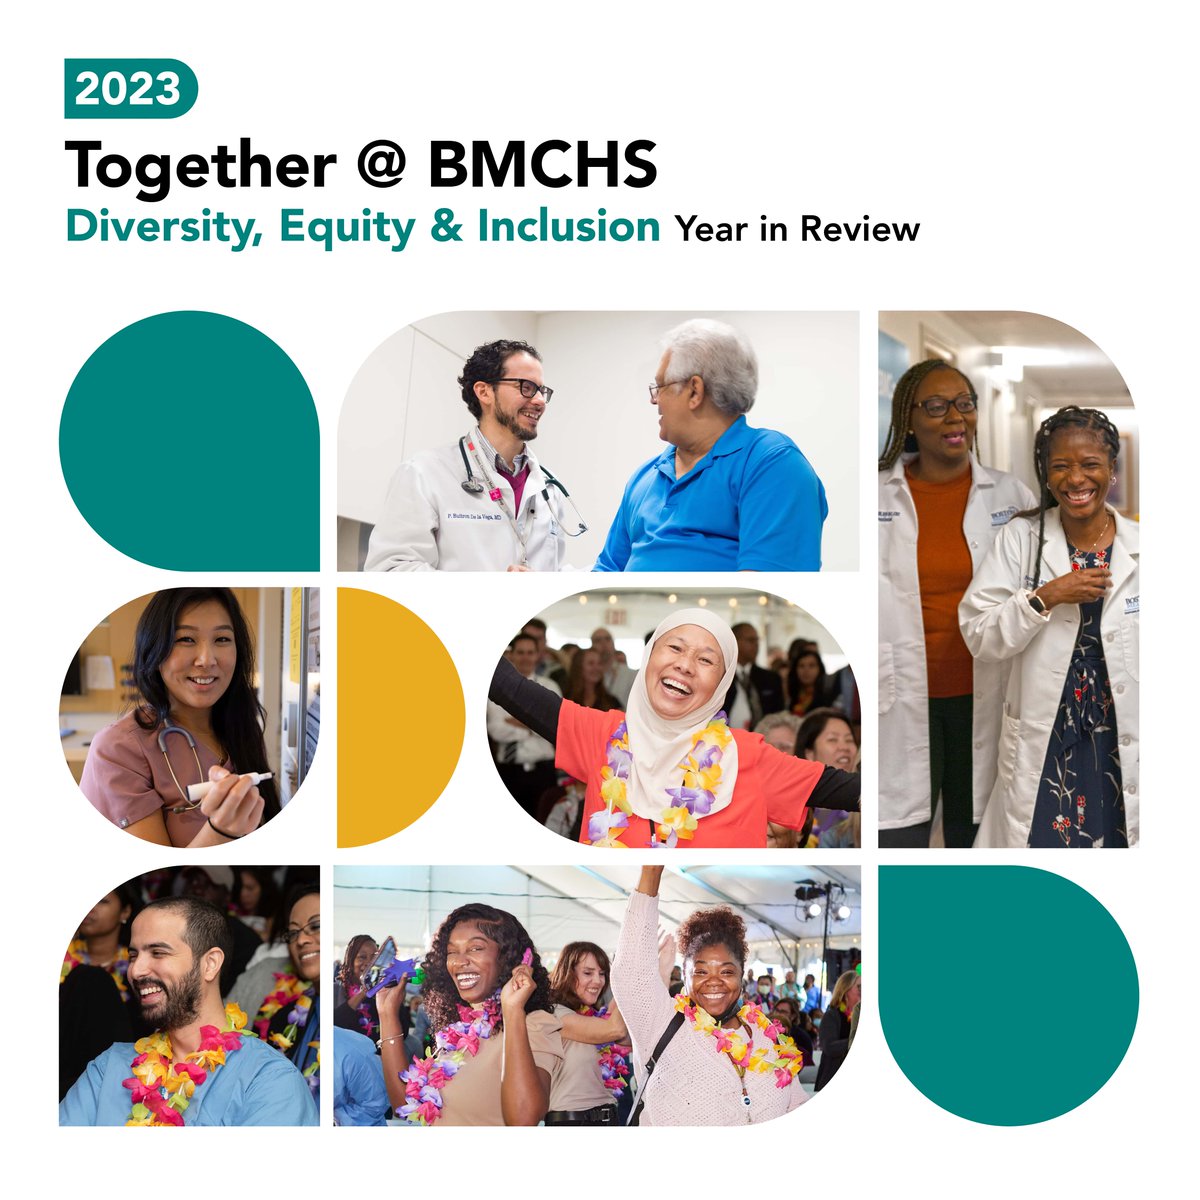 DEI is ingrained in our culture at BMC Health System (BMCHS). Our 2023 Together @ BMCHS report highlights how we're advancing DEI across our communities. This work takes all of us to find innovative solutions – everyone, every day. Learn more ➡️ bit.ly/3tgoJaZ